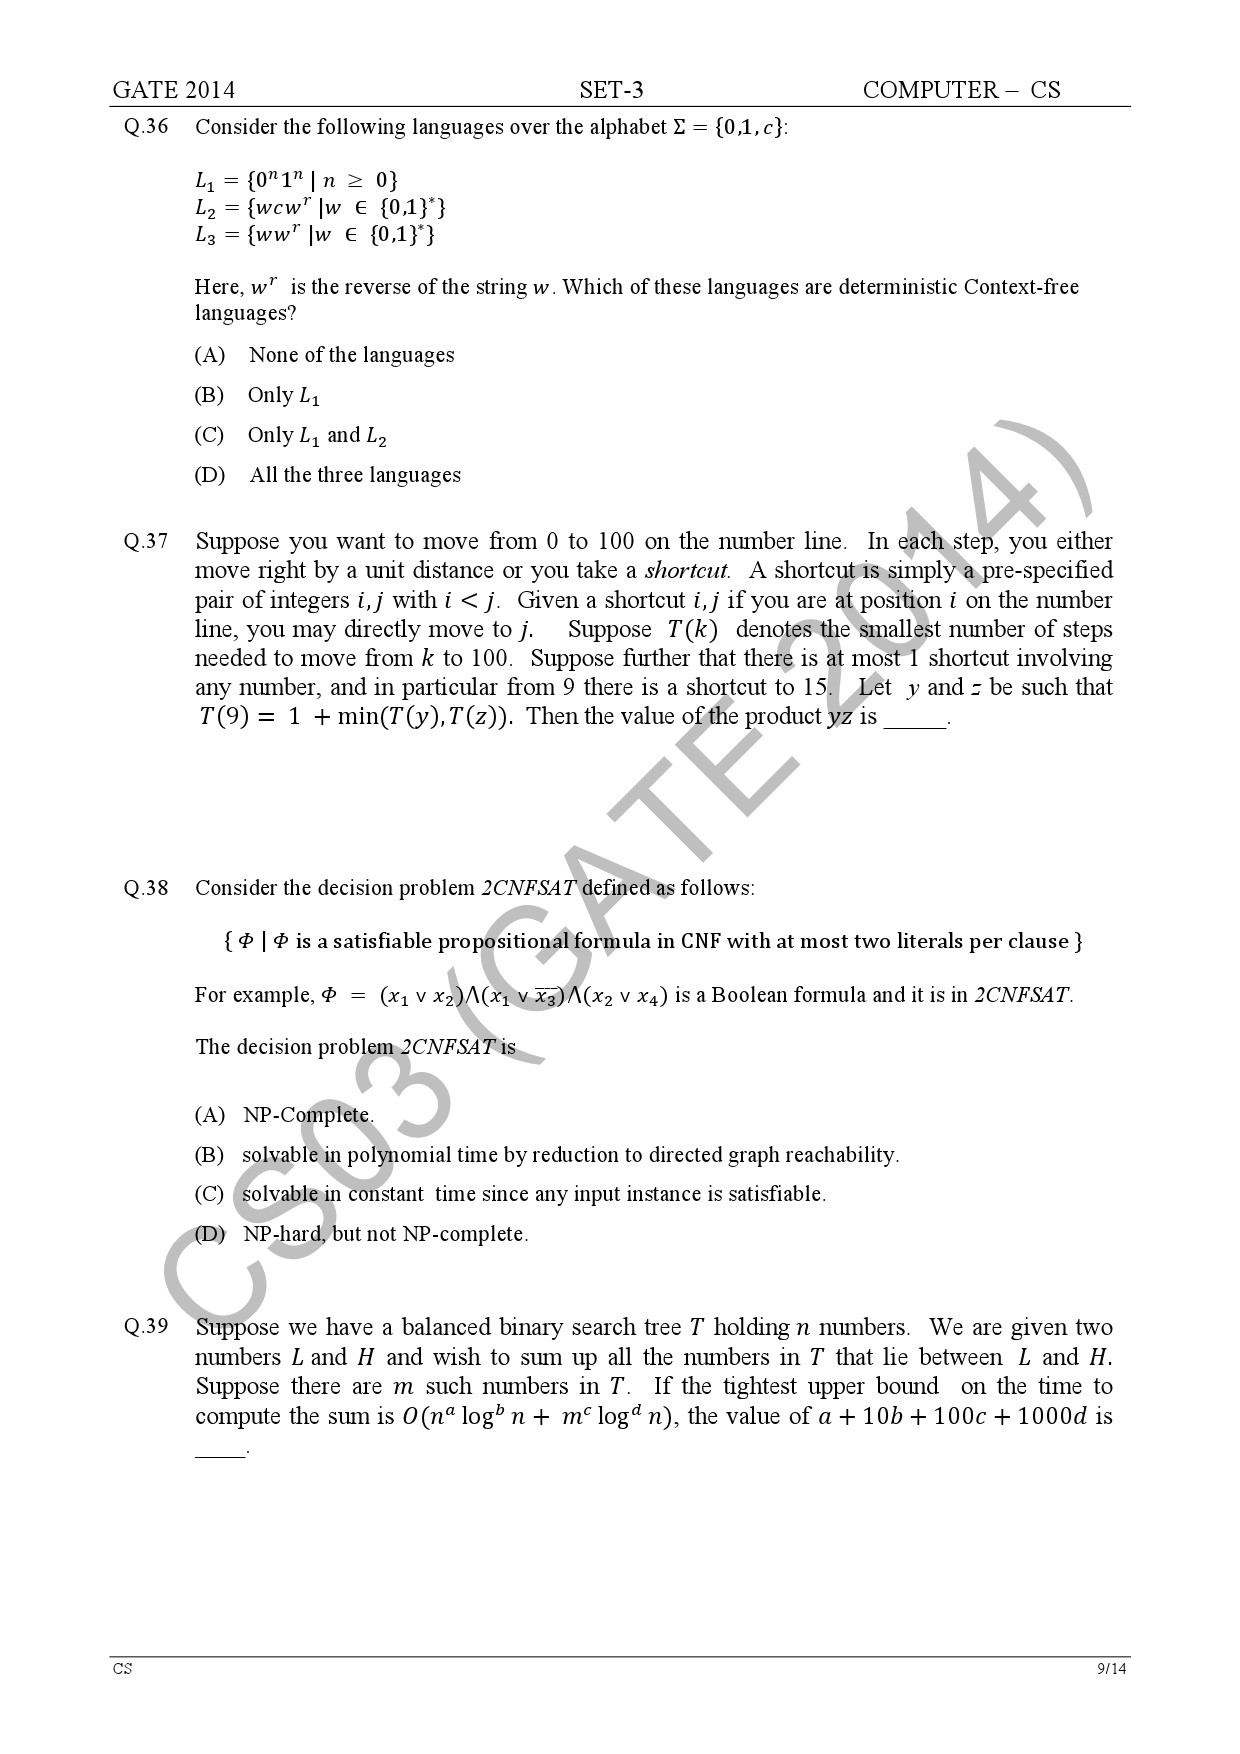 GATE Exam Question Paper 2014 Computer Science and Information Technology Set 3 15